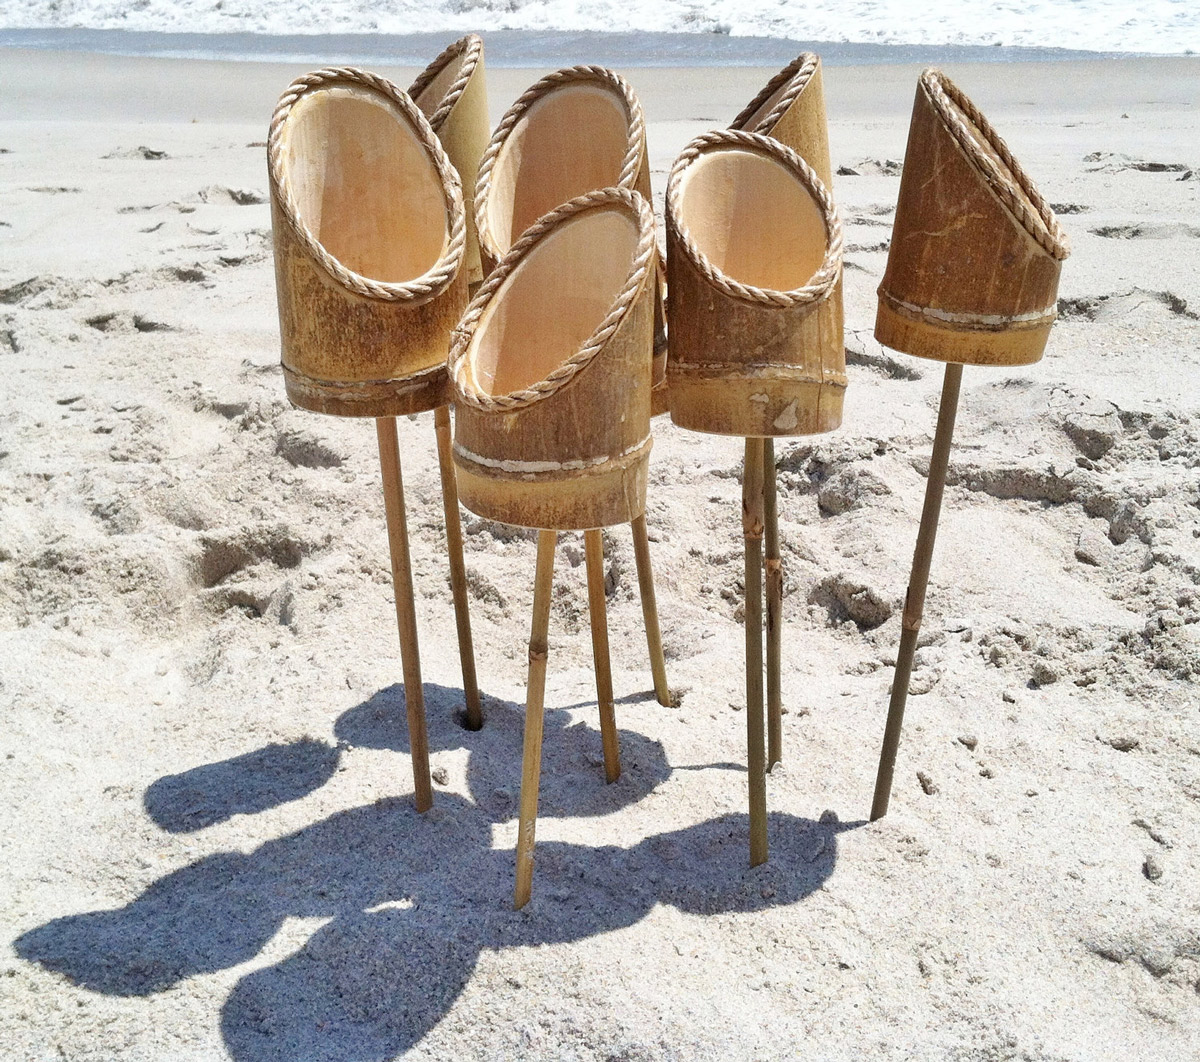 Bamboo Drink Holder Stakes For The Beach Or Lawn